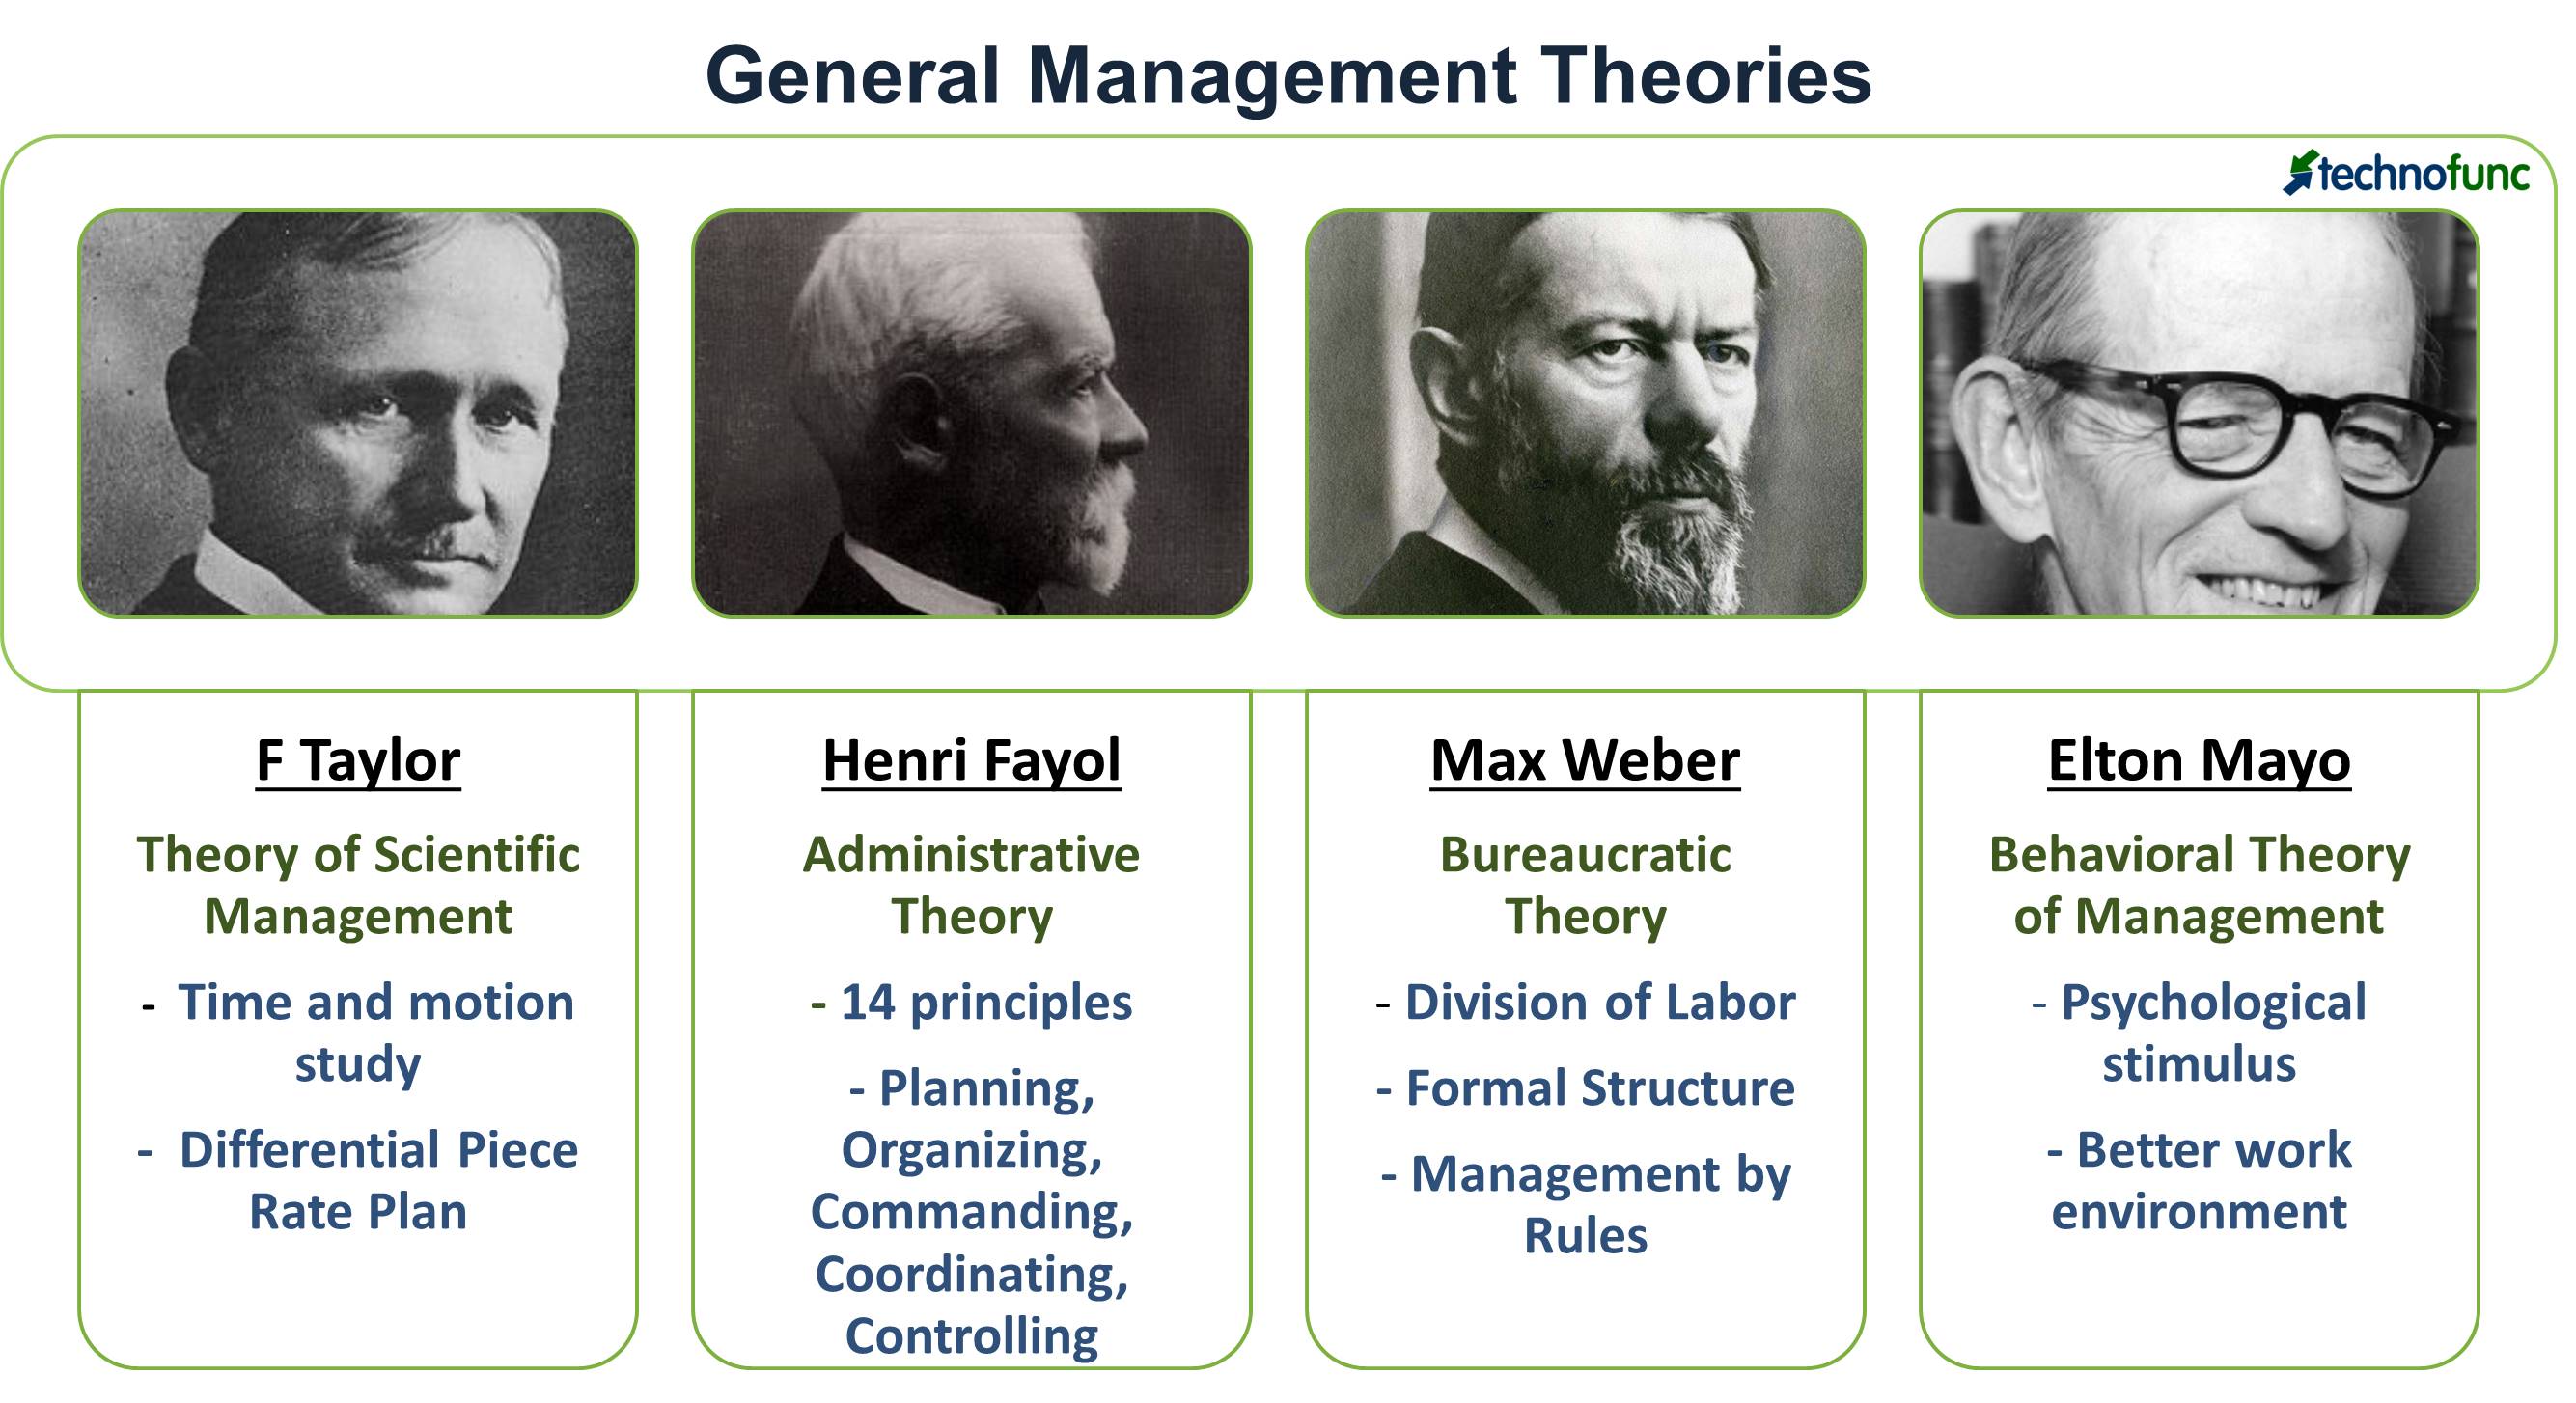 Who are the fathers of management theories?